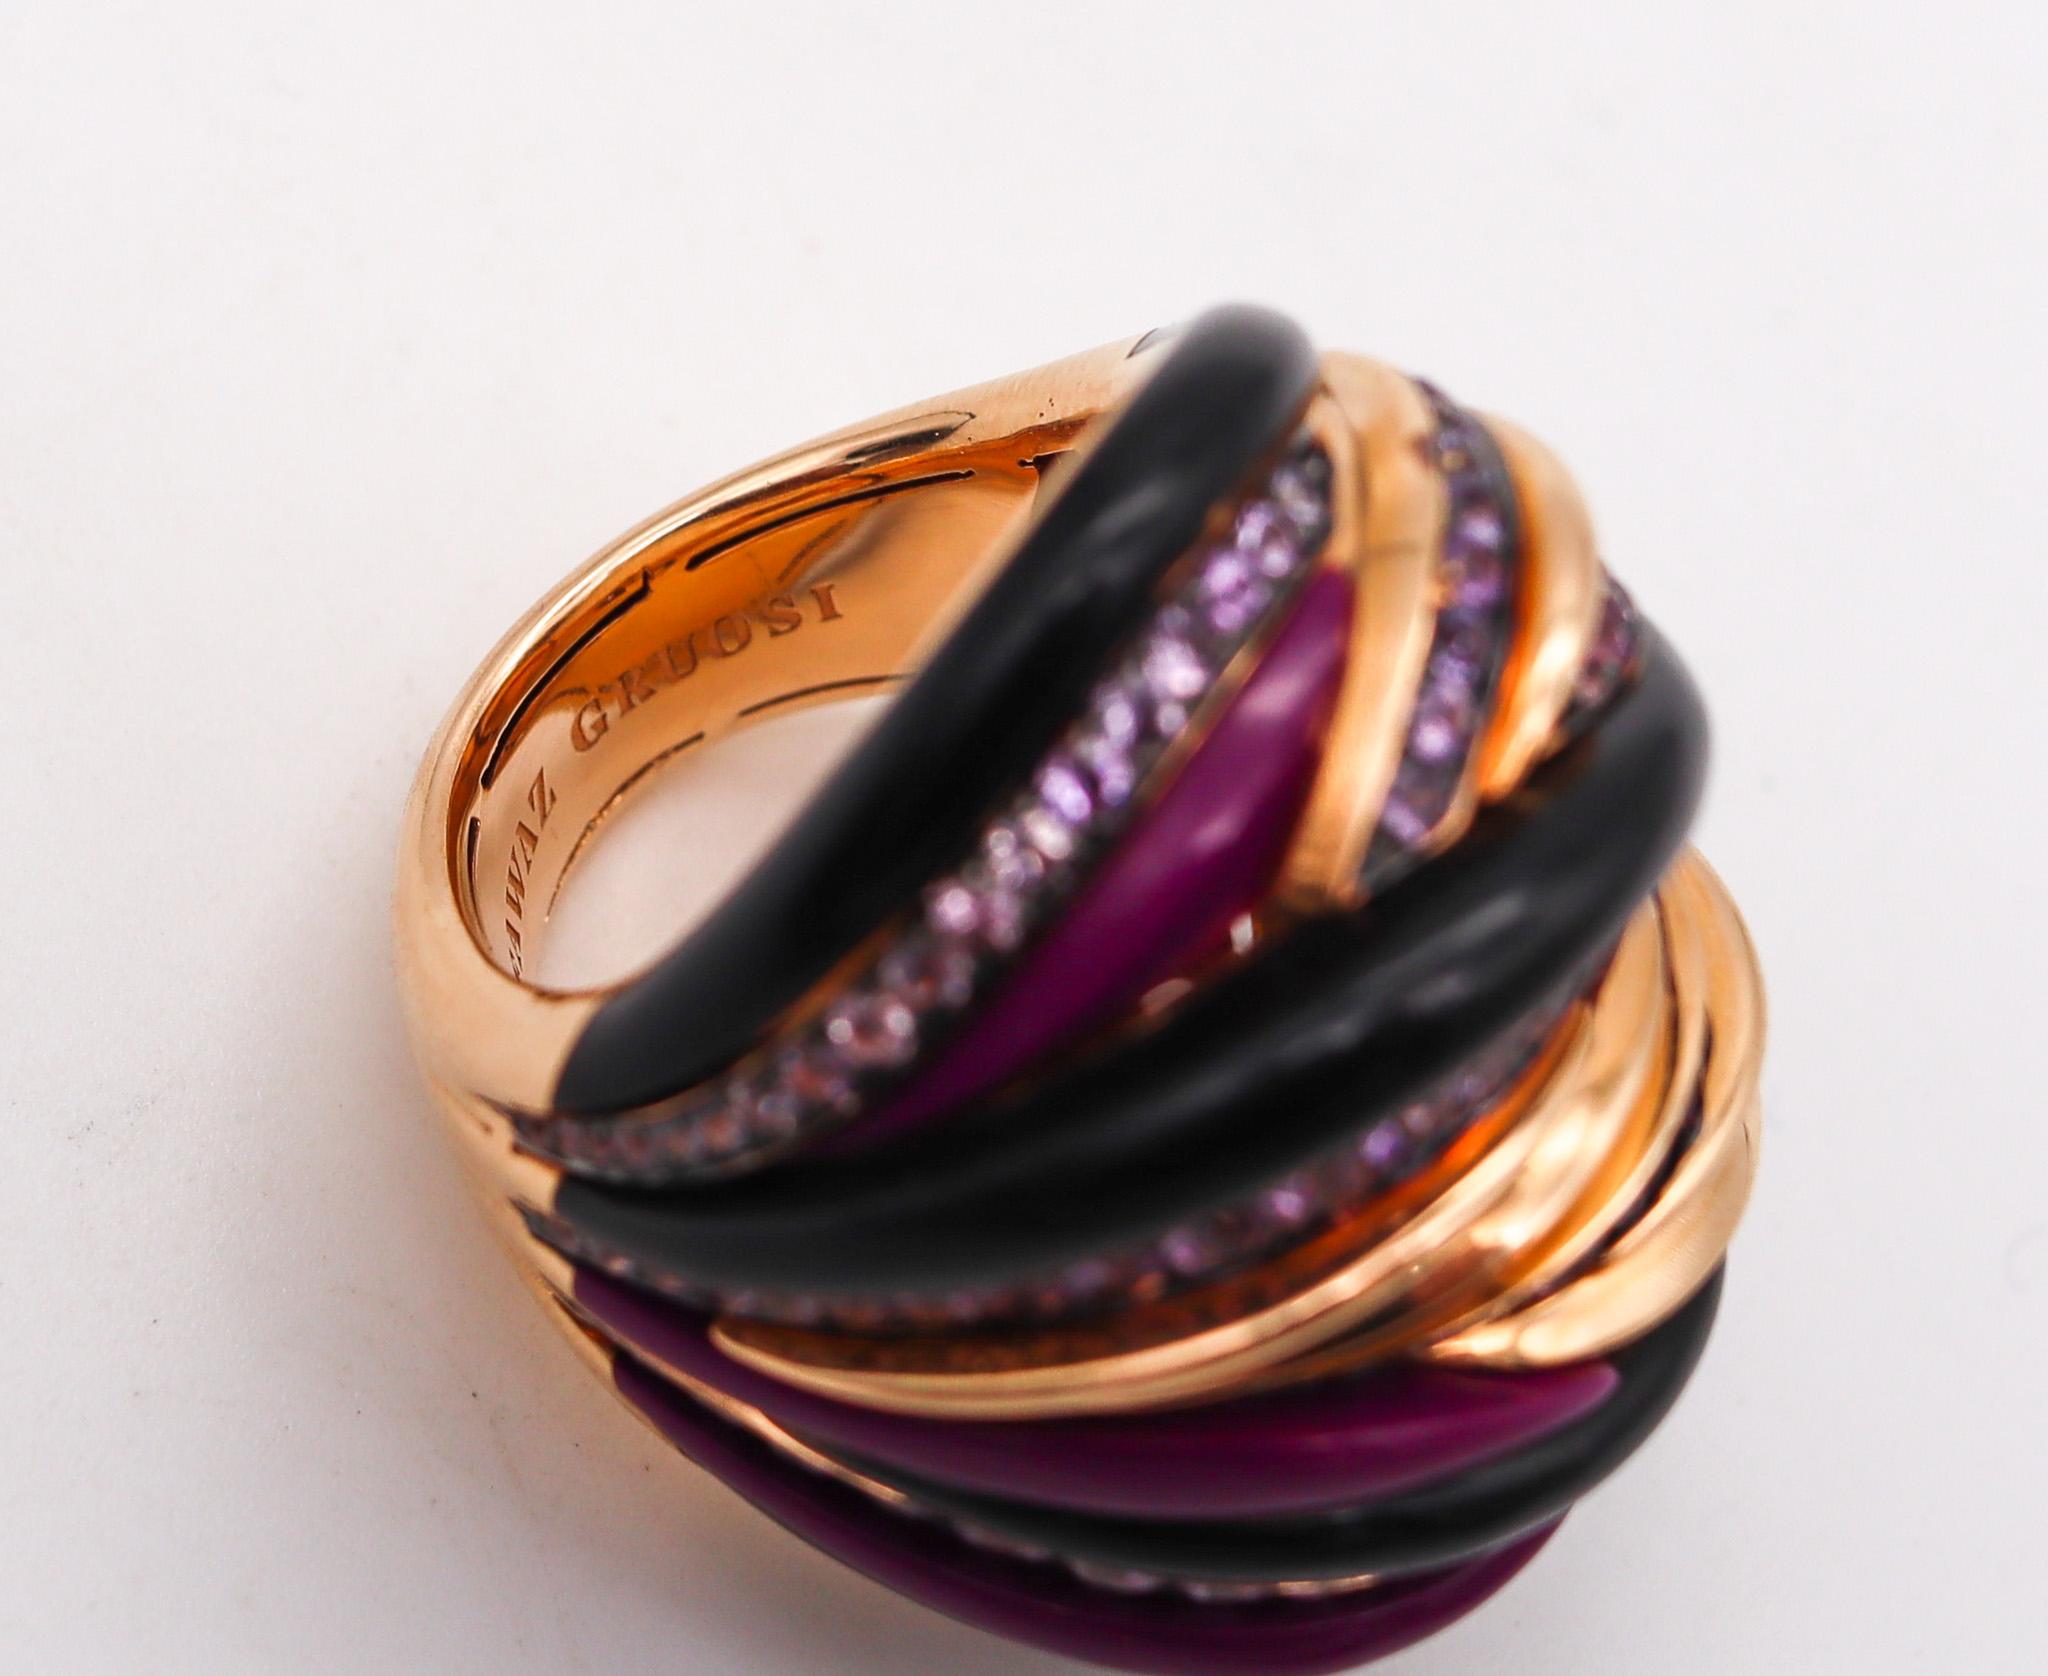 Brilliant Cut Fawaz Gruosi Sculptural Cocktail Ring in 18kt Gold 3.72ctw in Purple Sapphires For Sale